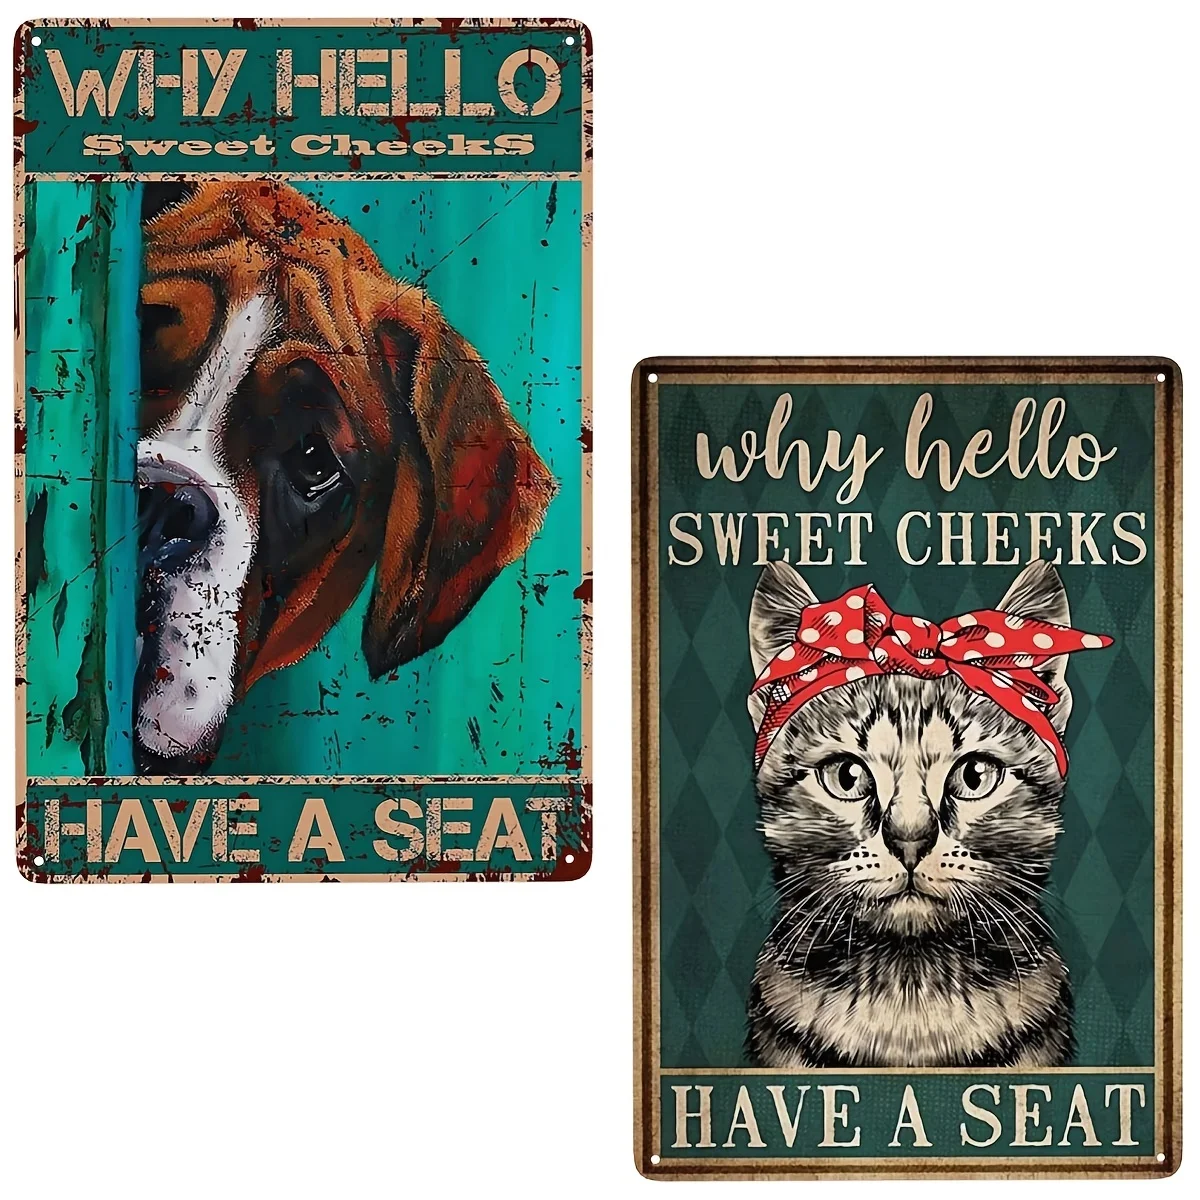 

Dog Cat Why Hello Sweet Cheeks Have A Seat Wall Art Decor, Retro Vintage Kitchen Bedroom Wall Decor Cafe Living Room